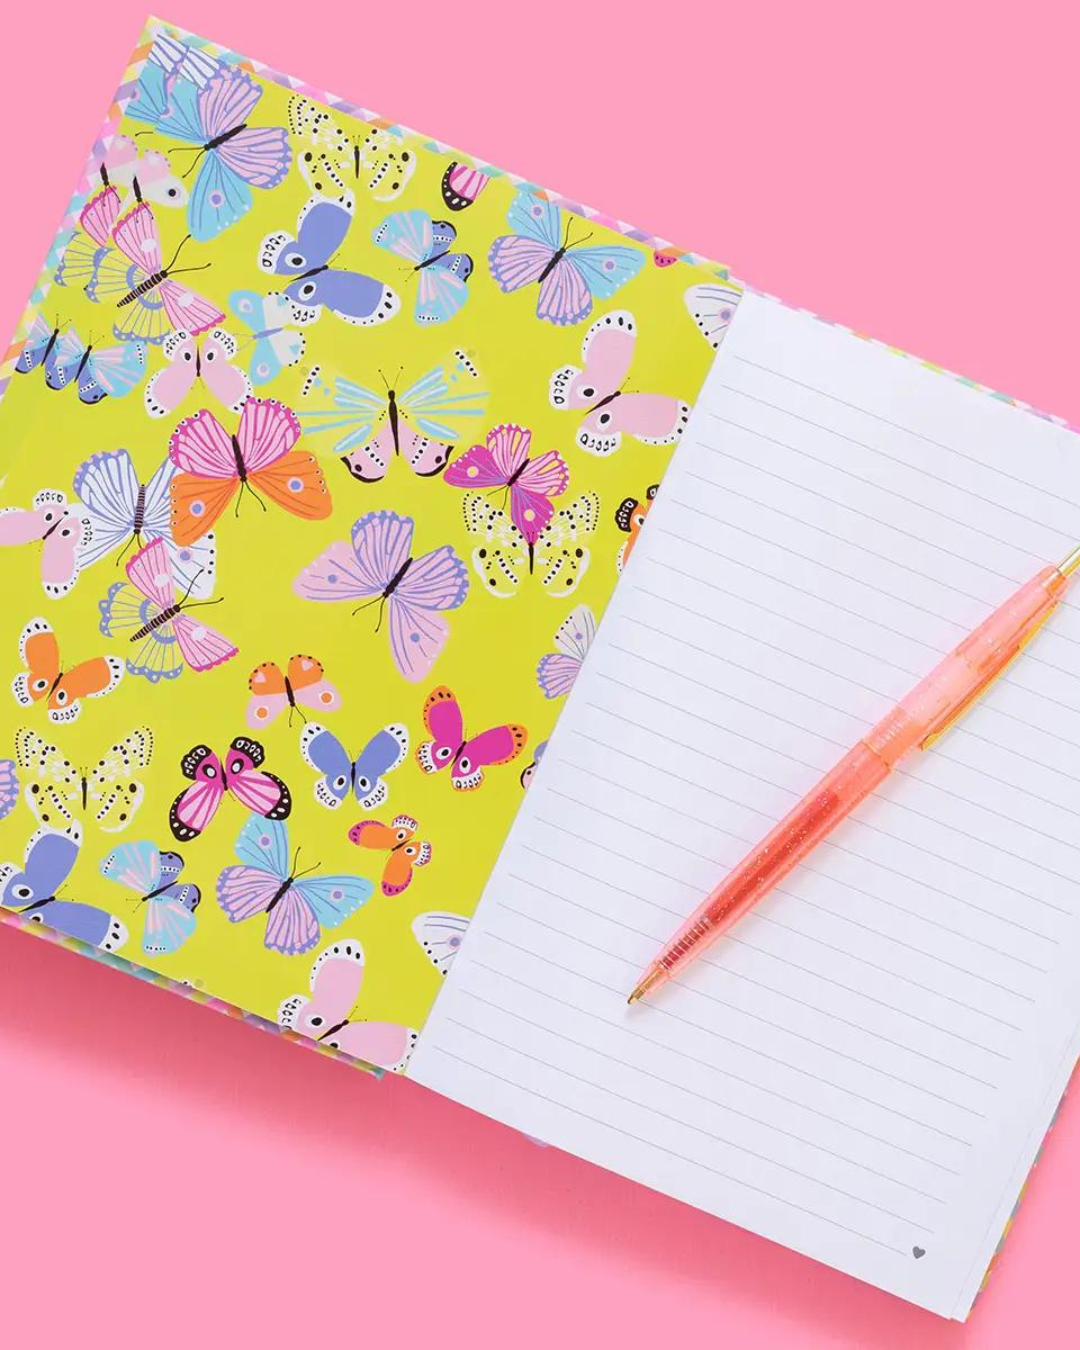 Colorful Gingham Notebook